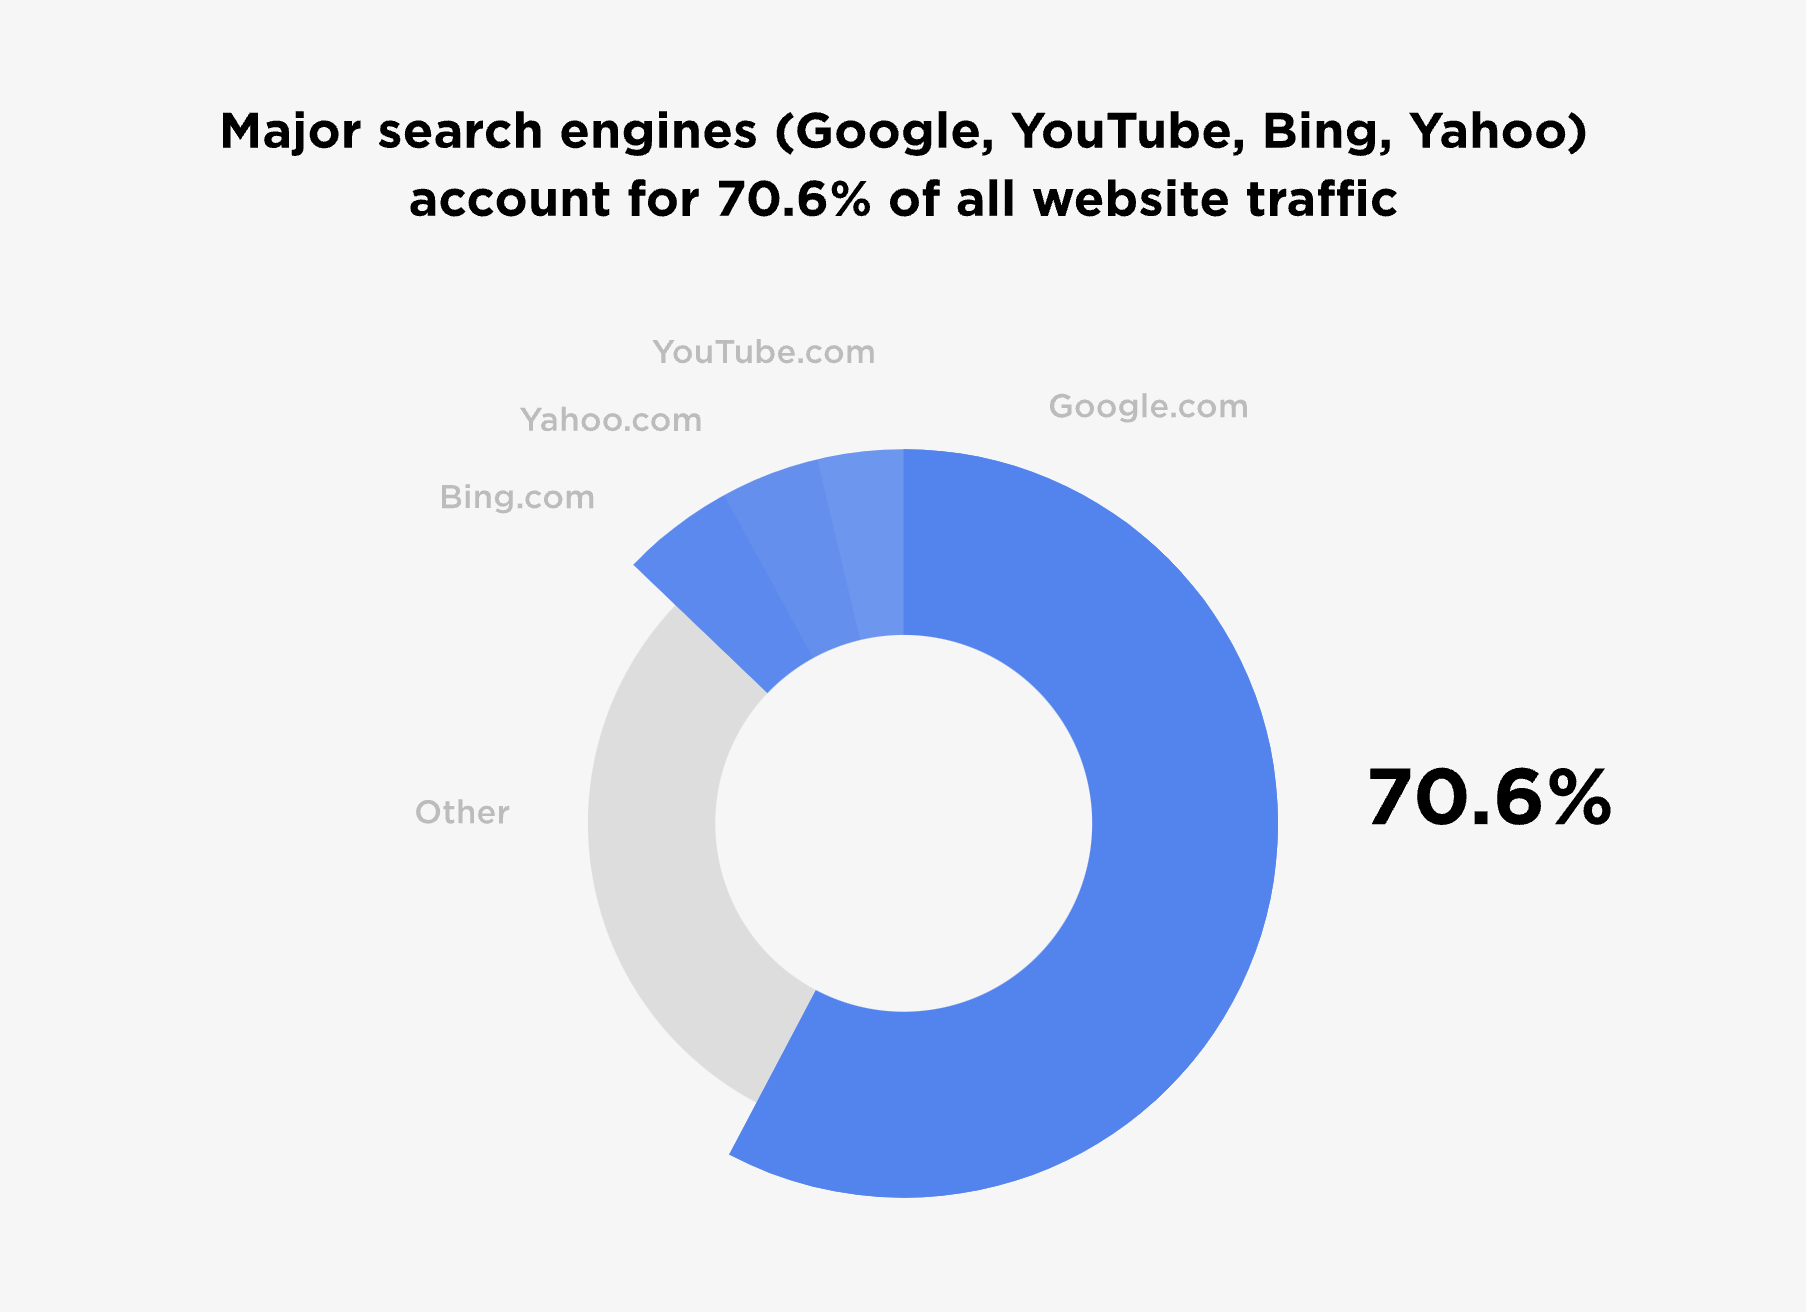 image shows that 70.6% of all website traffic comes from search engines